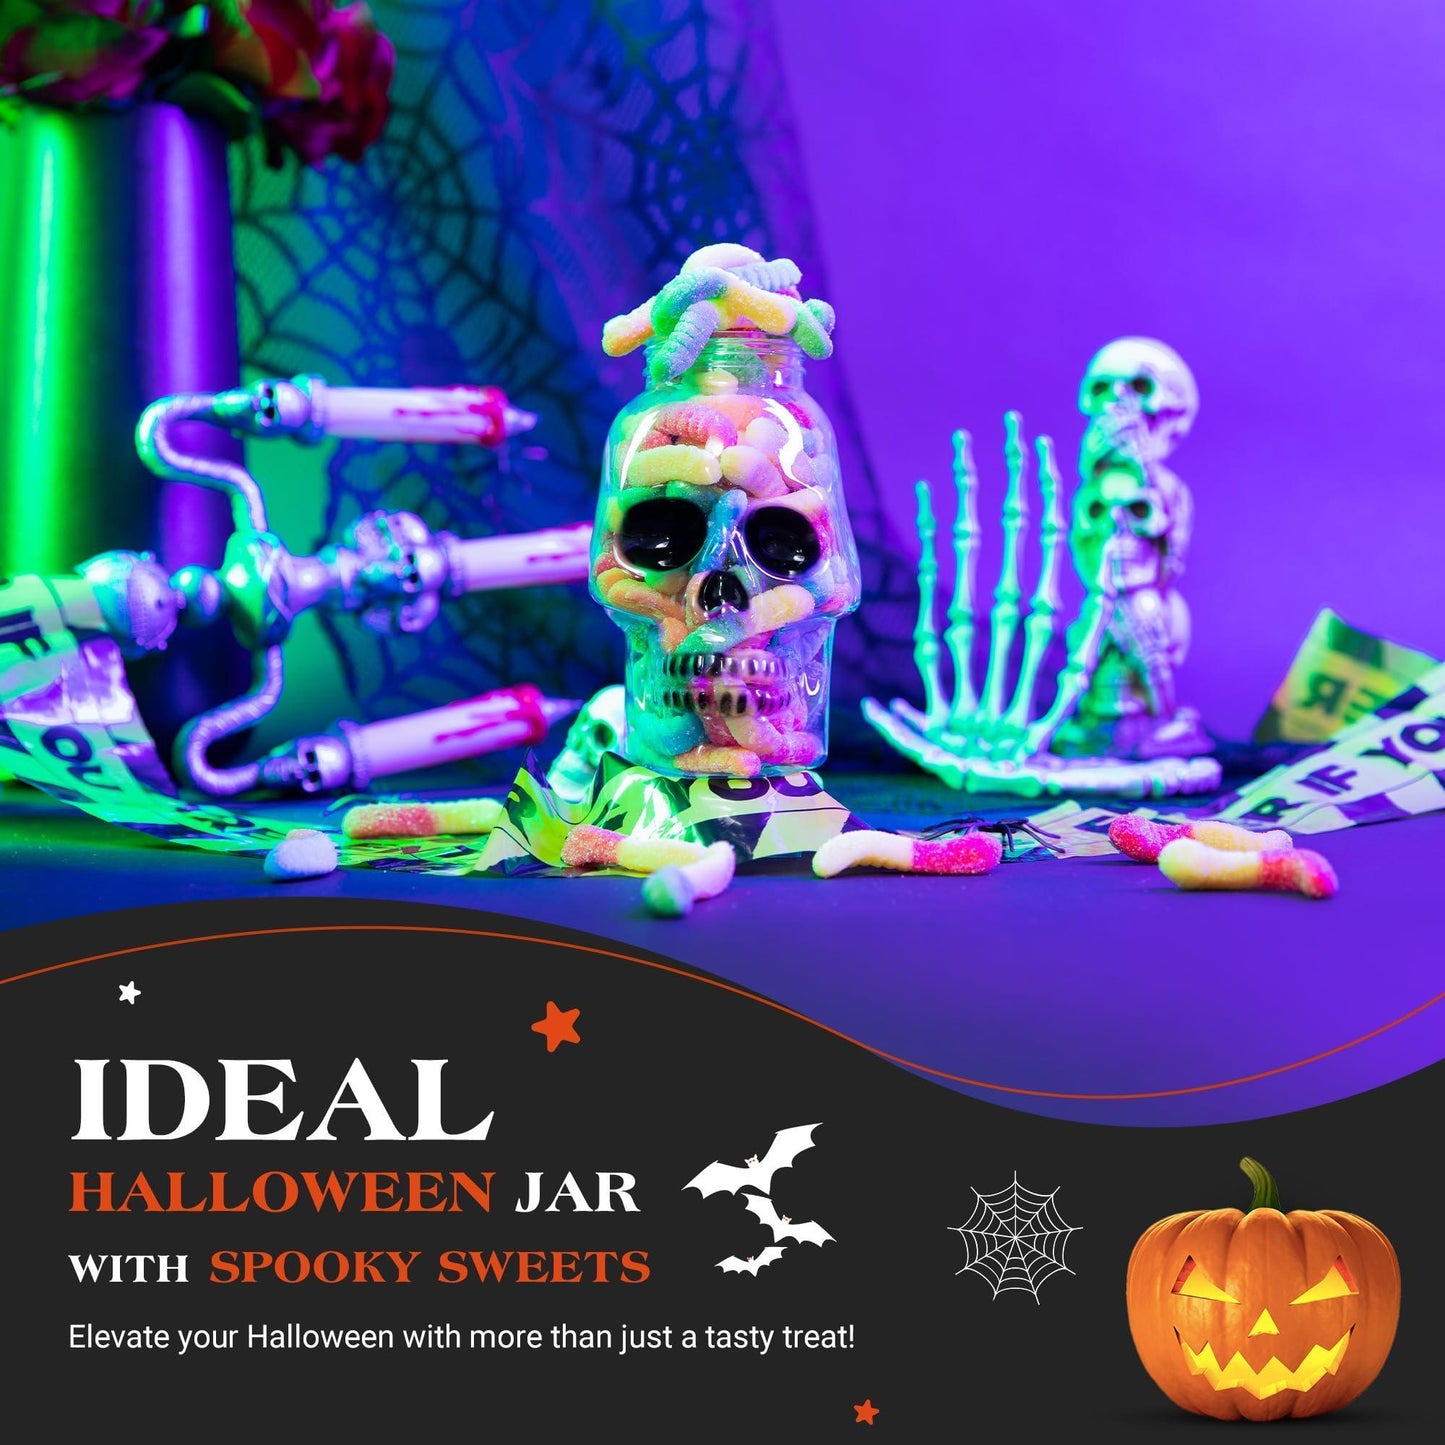 Halloween Trick or Treat Candies | Stuffed Sour Worms Gummies in Scary Skull Shape Candy Jar | Spooky Sweets | Perfect For Halloween - Loomini